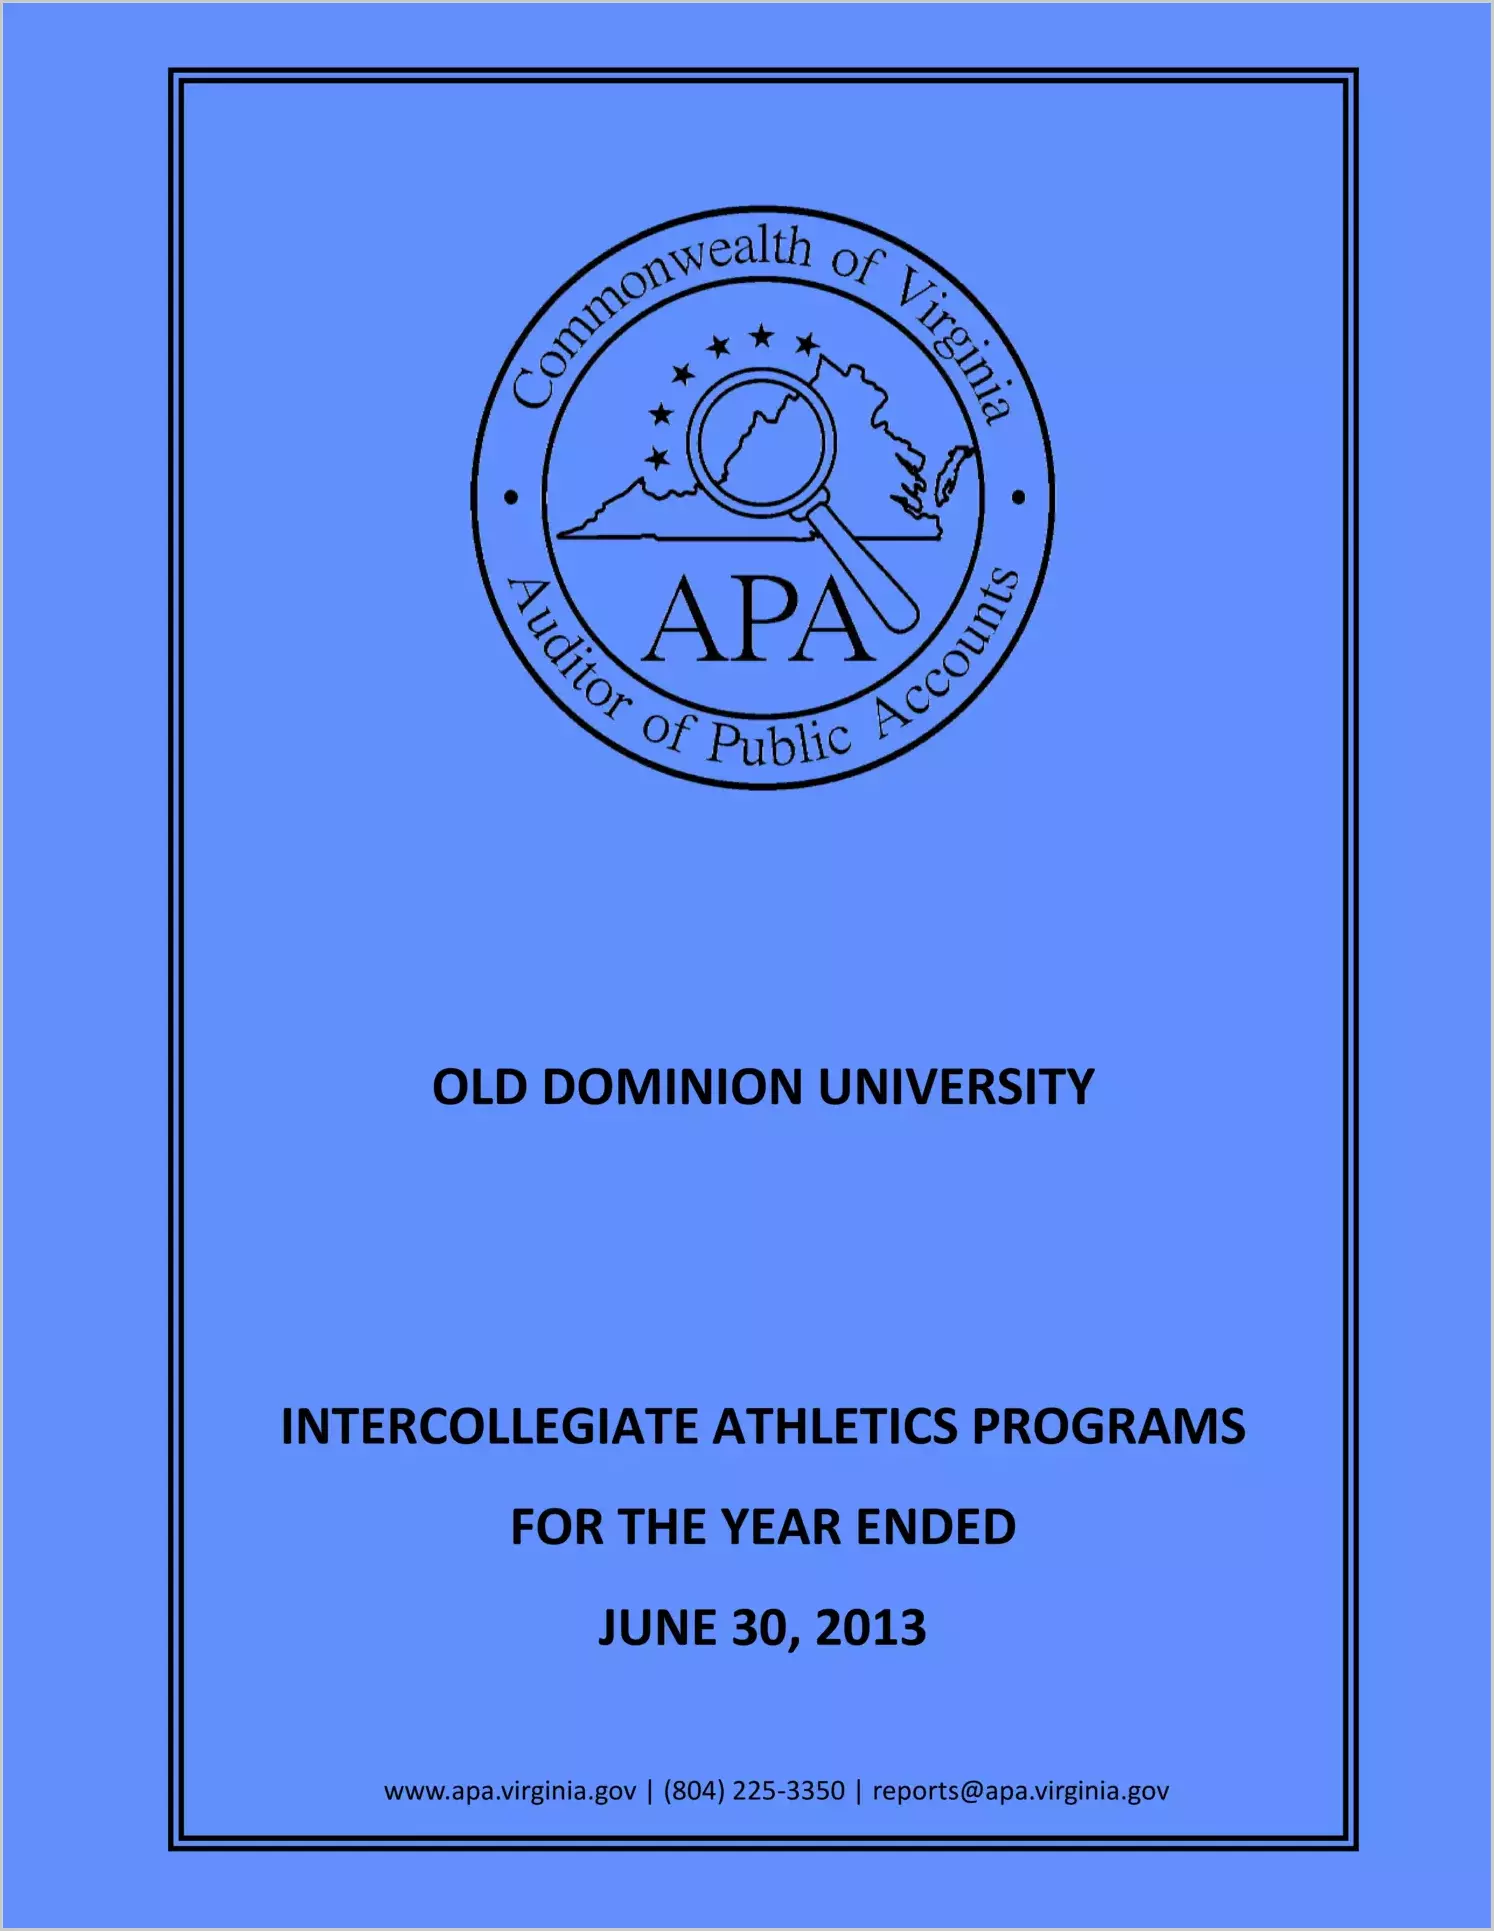 Old Dominion University Intercollegiate Athletic Programs for the year ended June 30, 2013